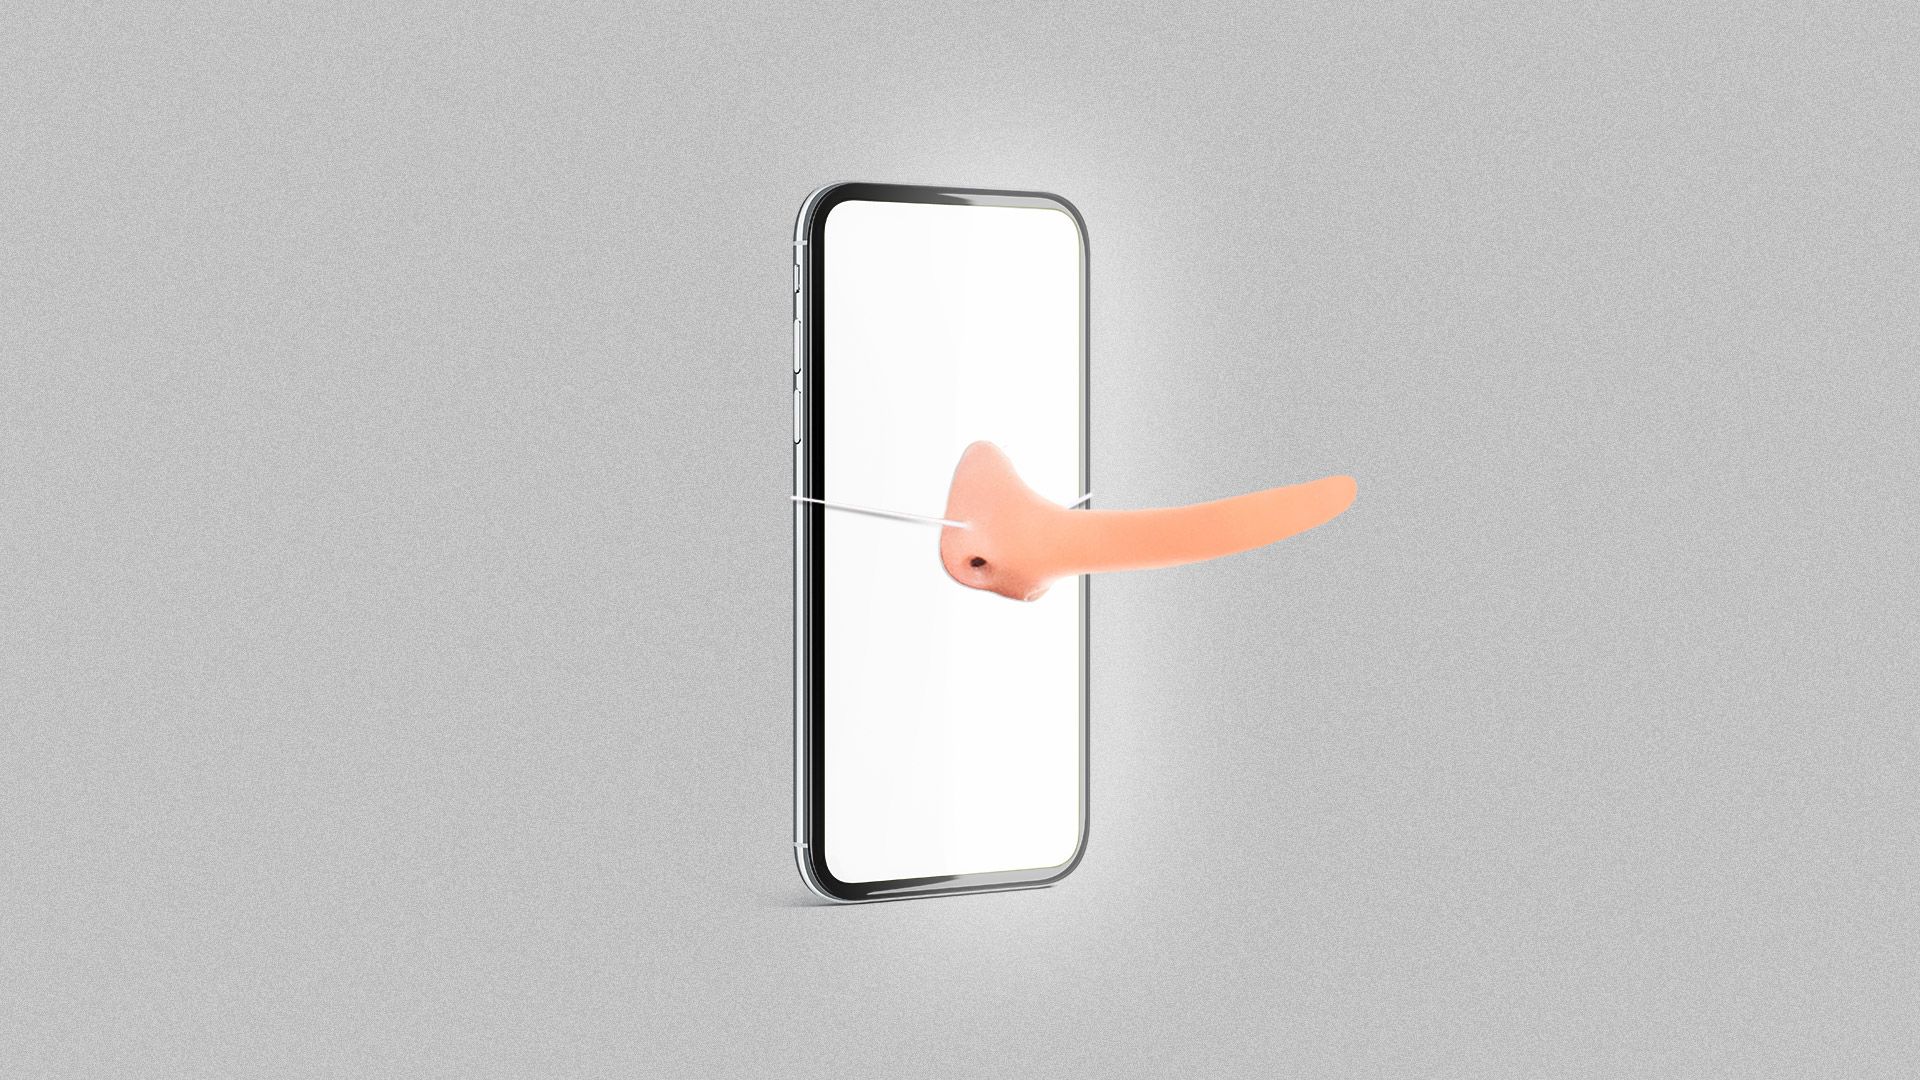  Illustration of a smart phone with a long fake nose tied to the front. 